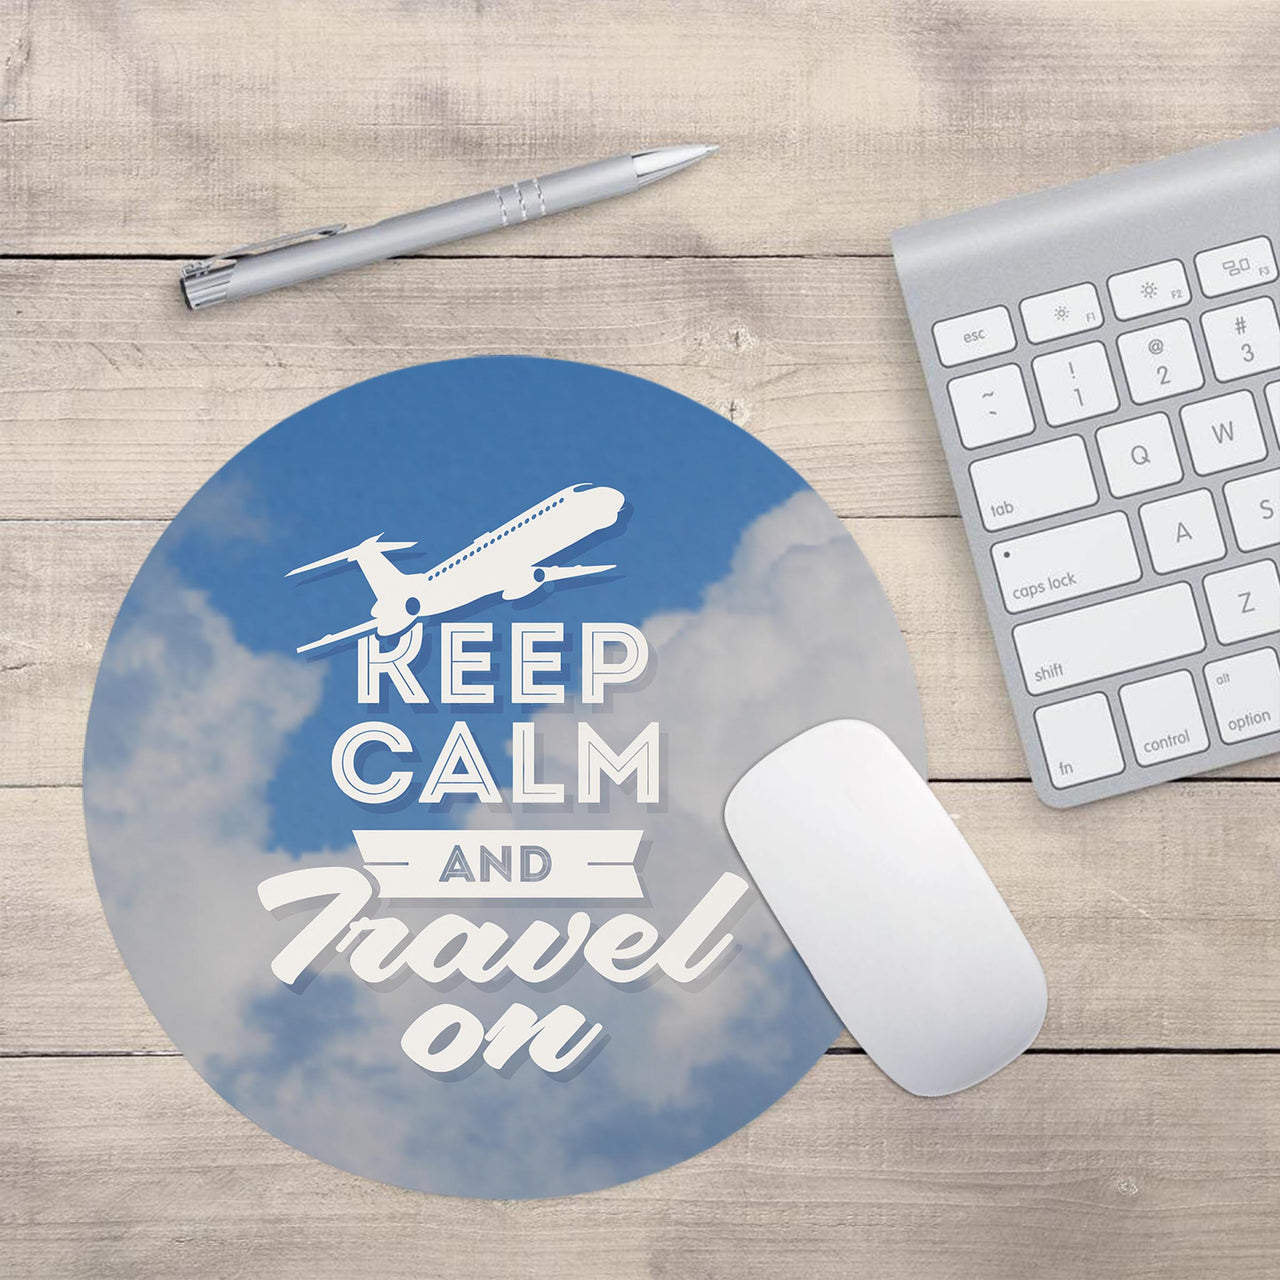 Keep Calm and Travel On Designed Mouse Pads